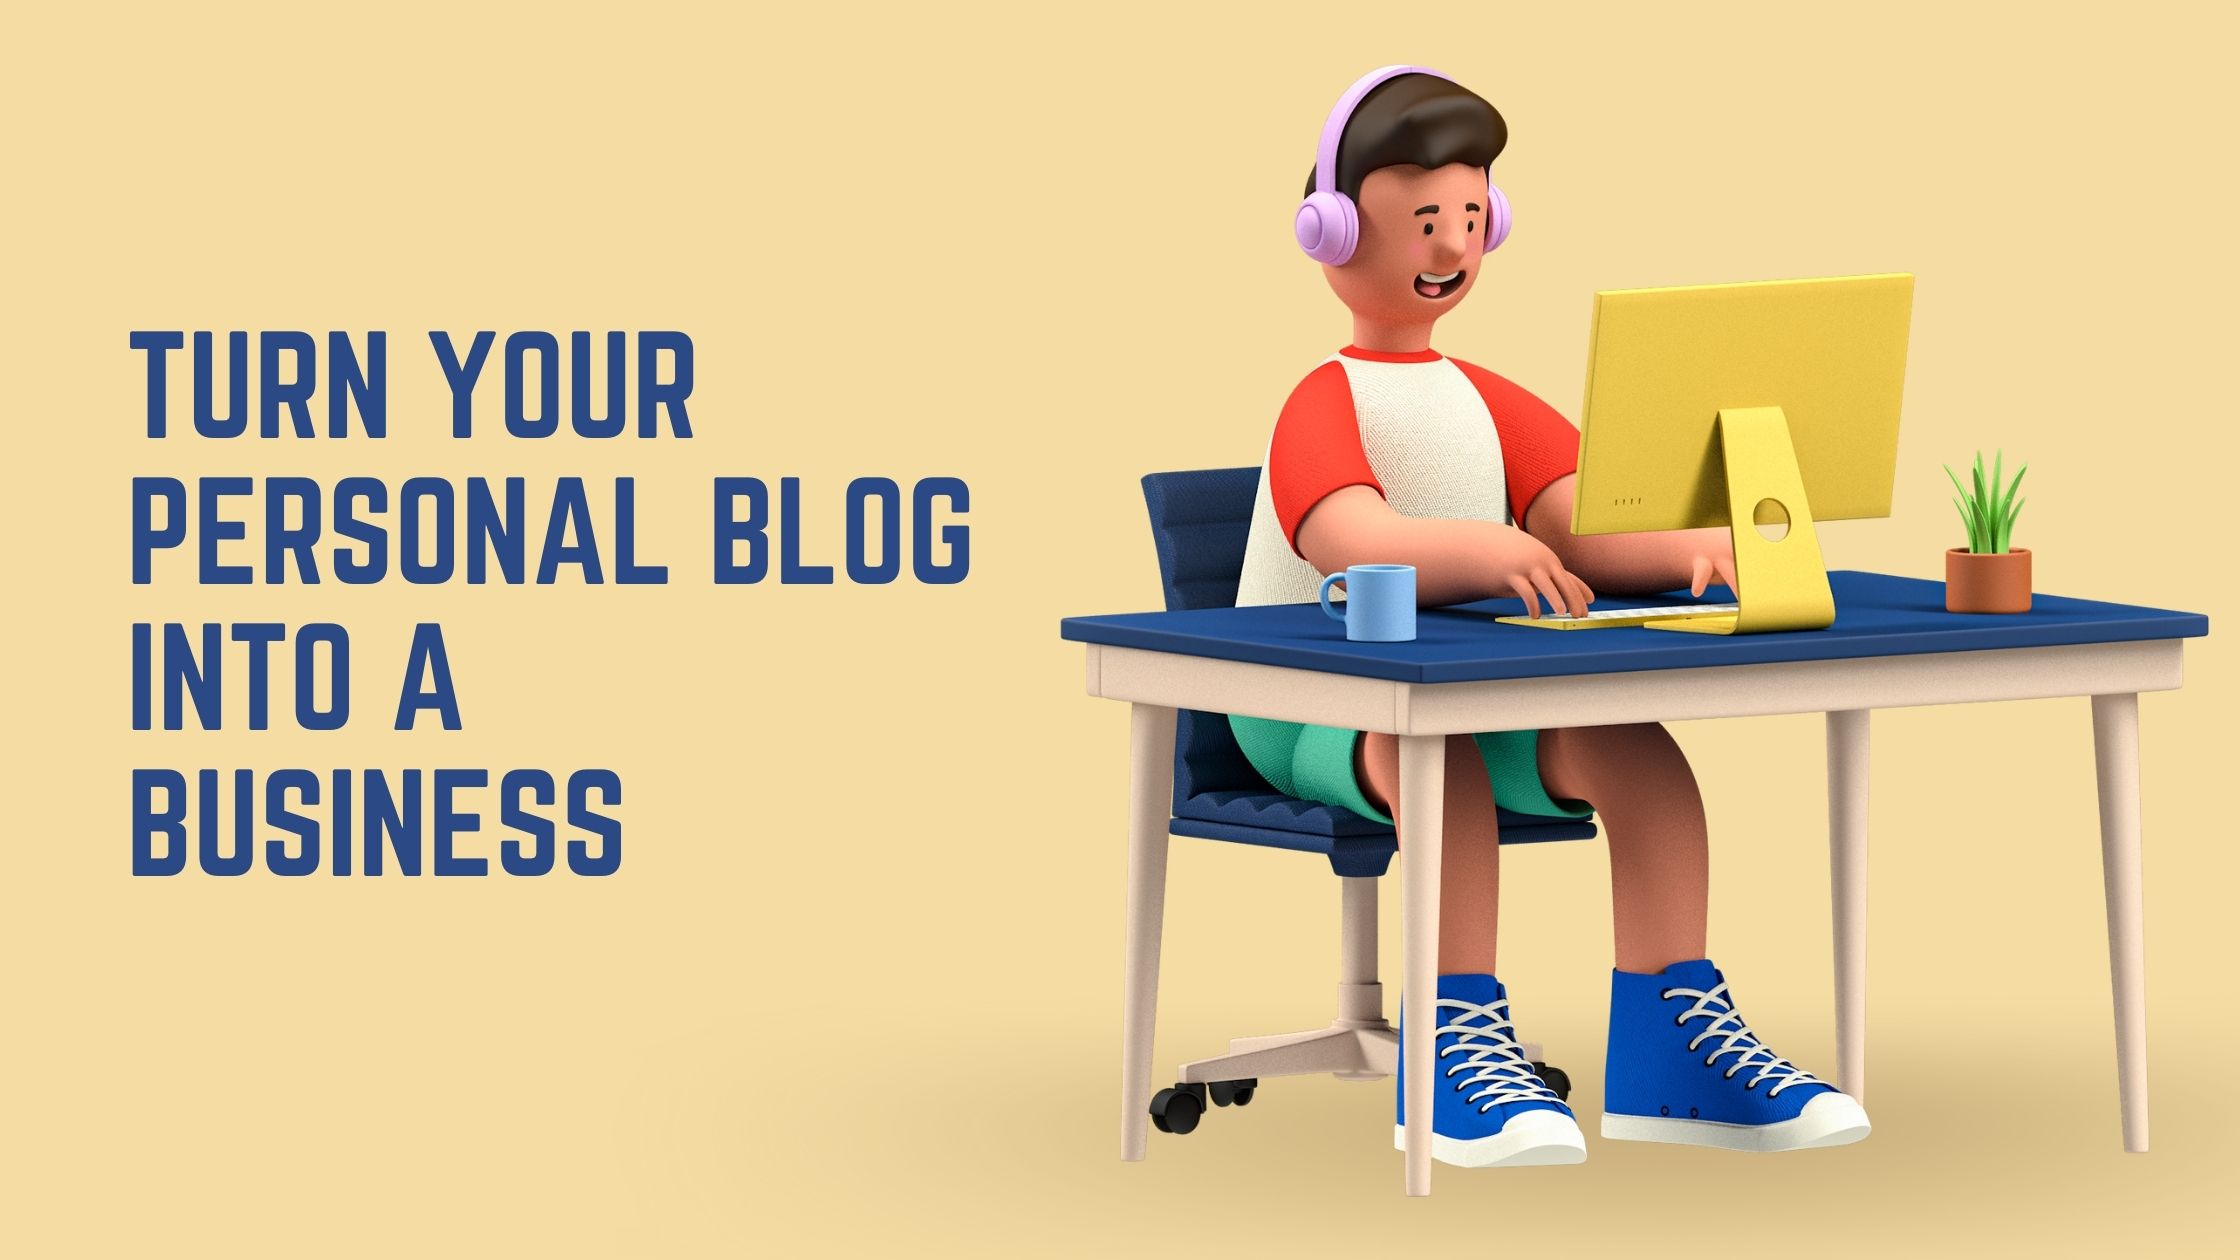 Turn Your Personal Blog into a Business